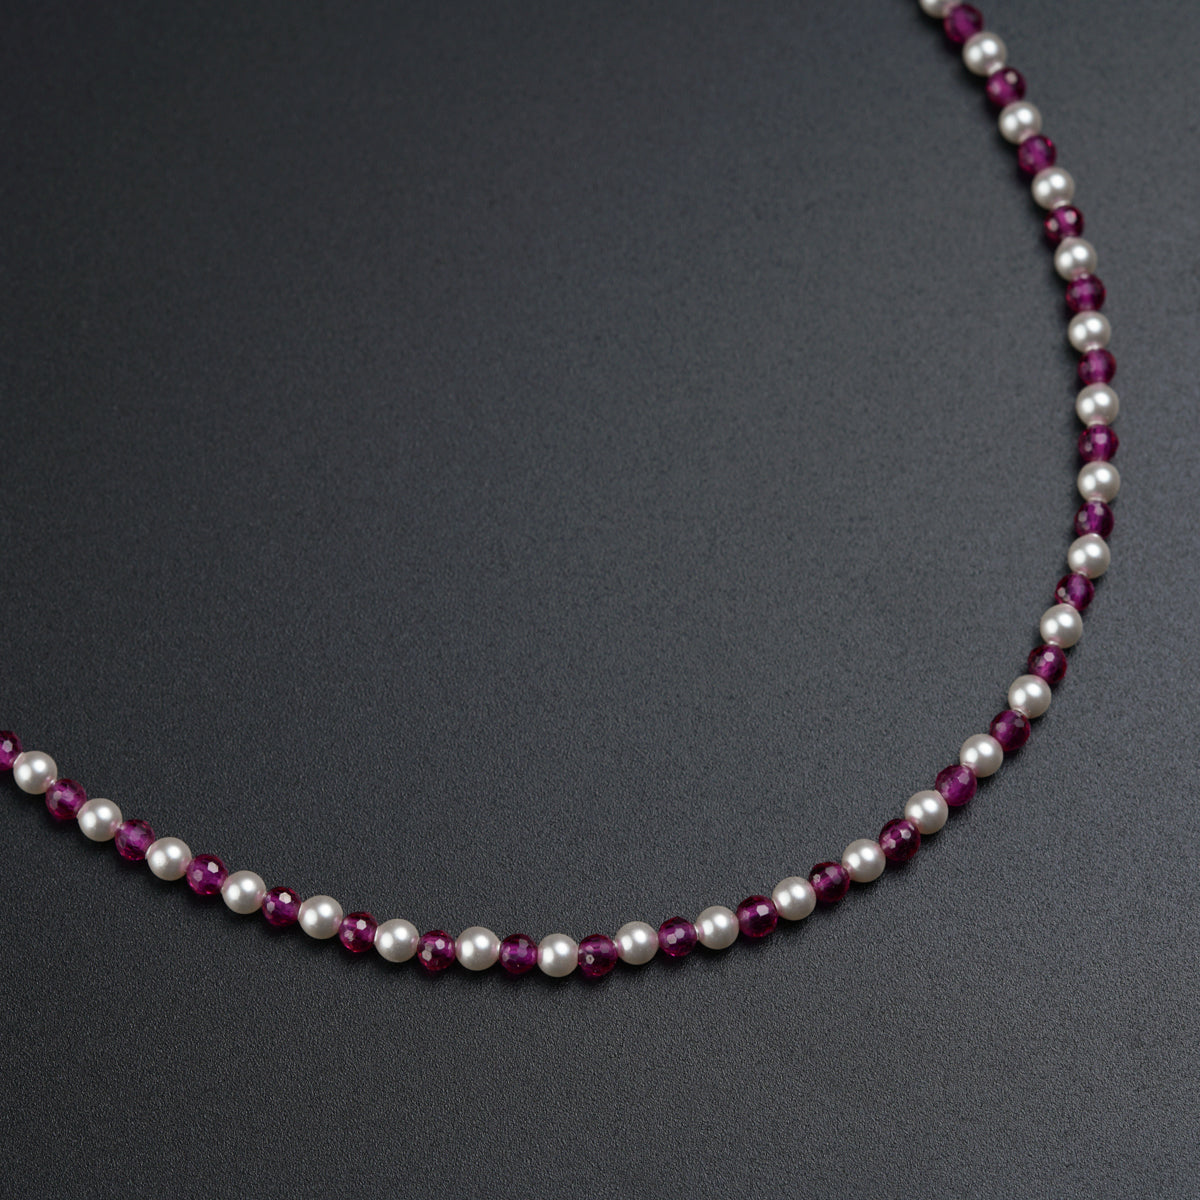 a necklace made of pearls and purple glass beads